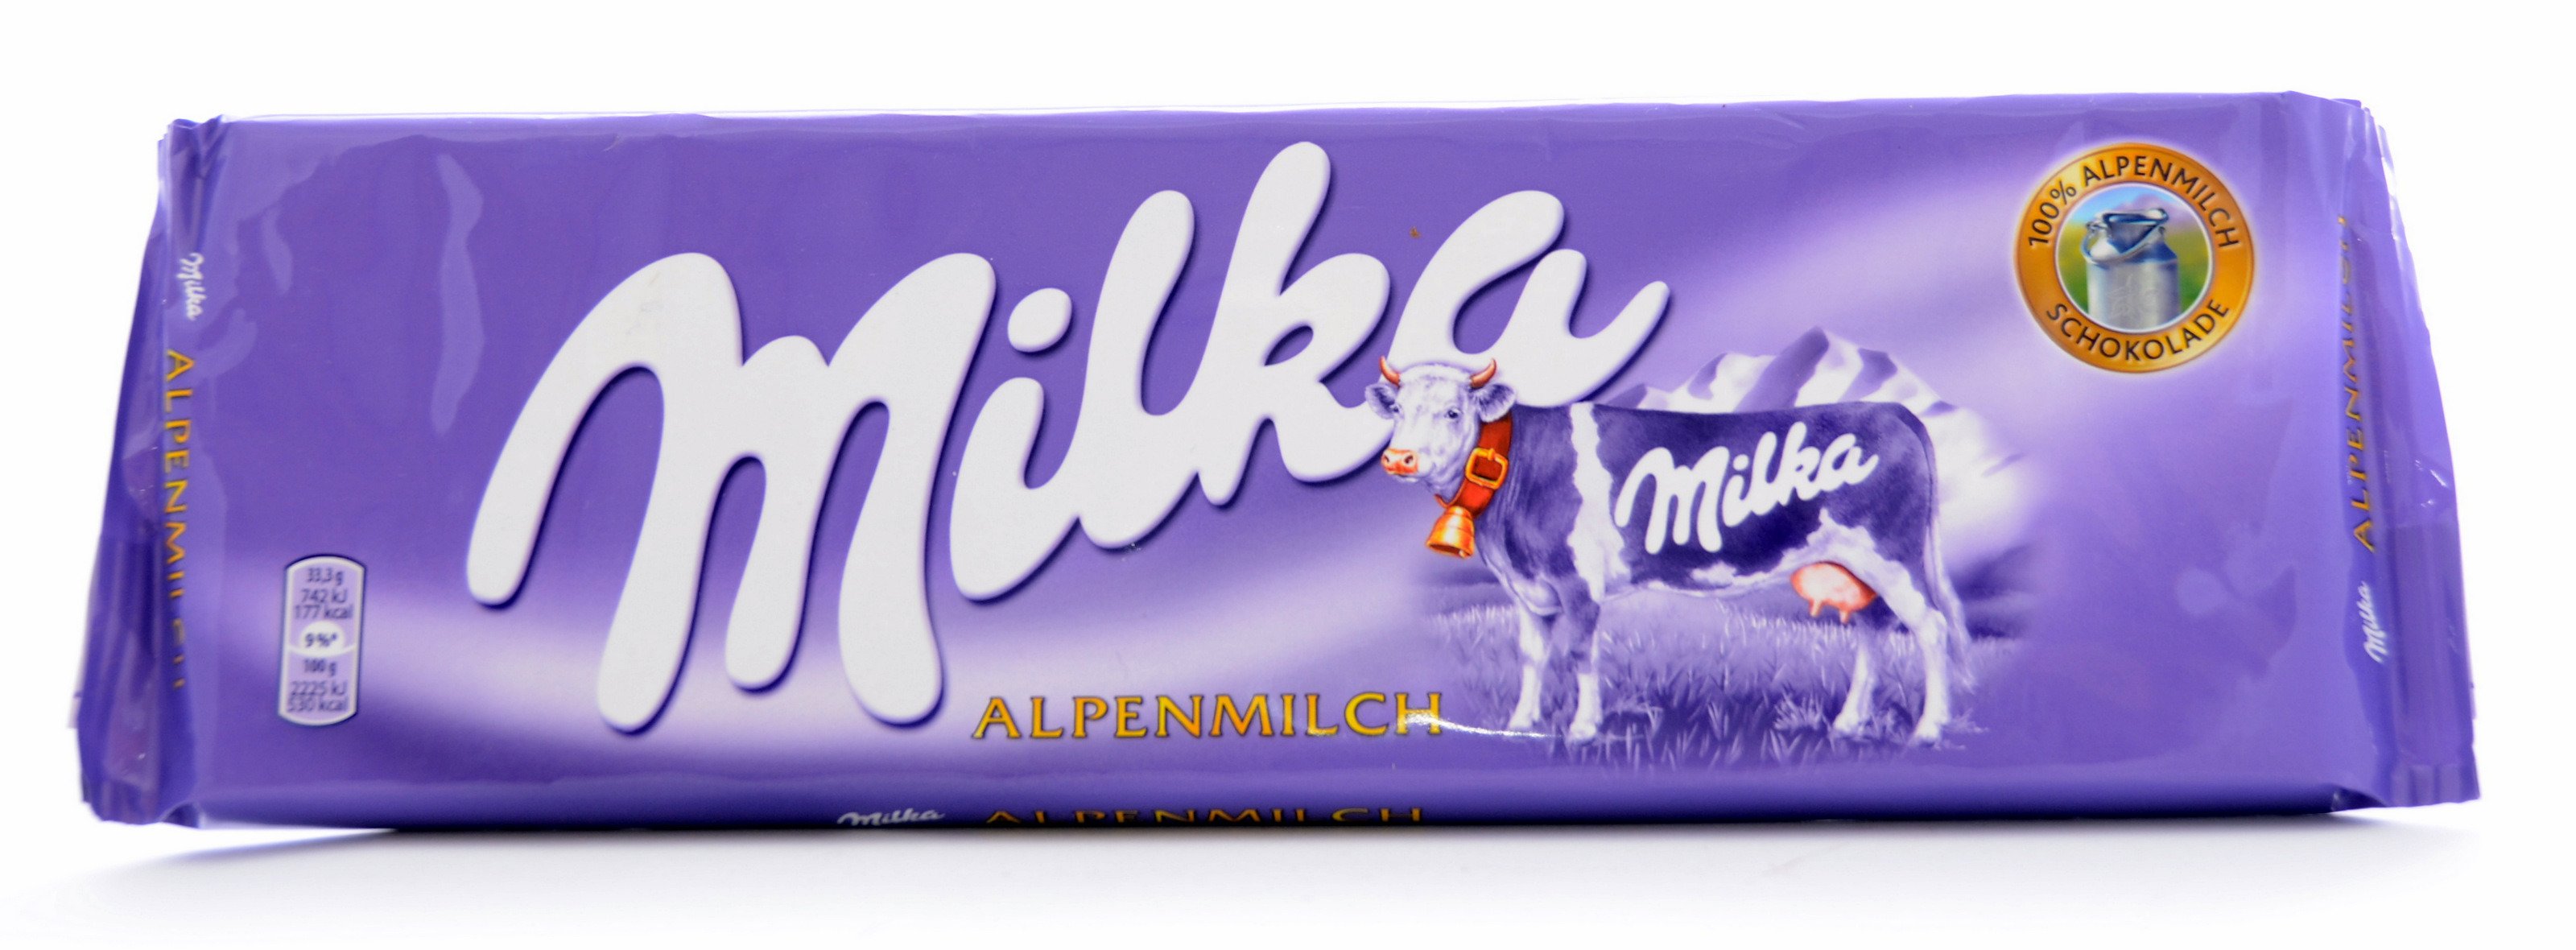 milka-chocolate-alpenmilch-300-g-confectionery-milka-offer-brands